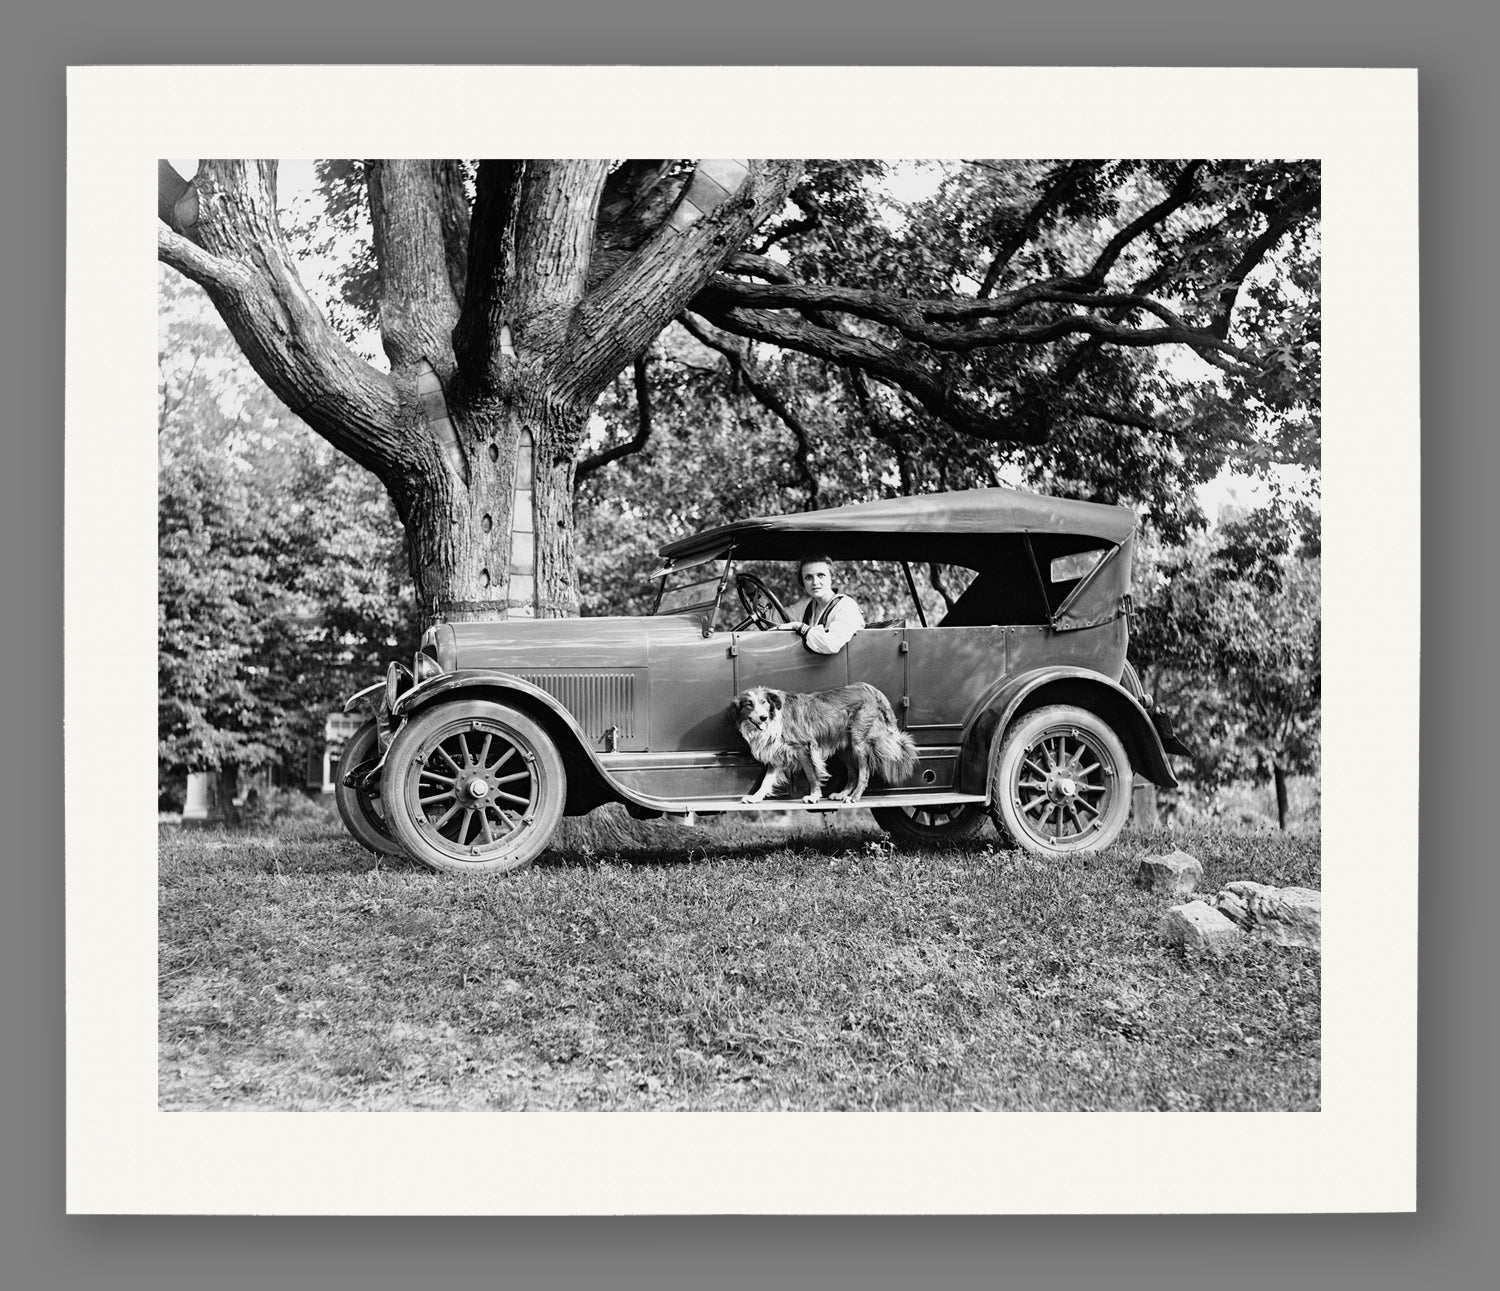 A mockup of a paper print of a vintage photograph of a Jordan Motor Car Company vehicle in front of a tree